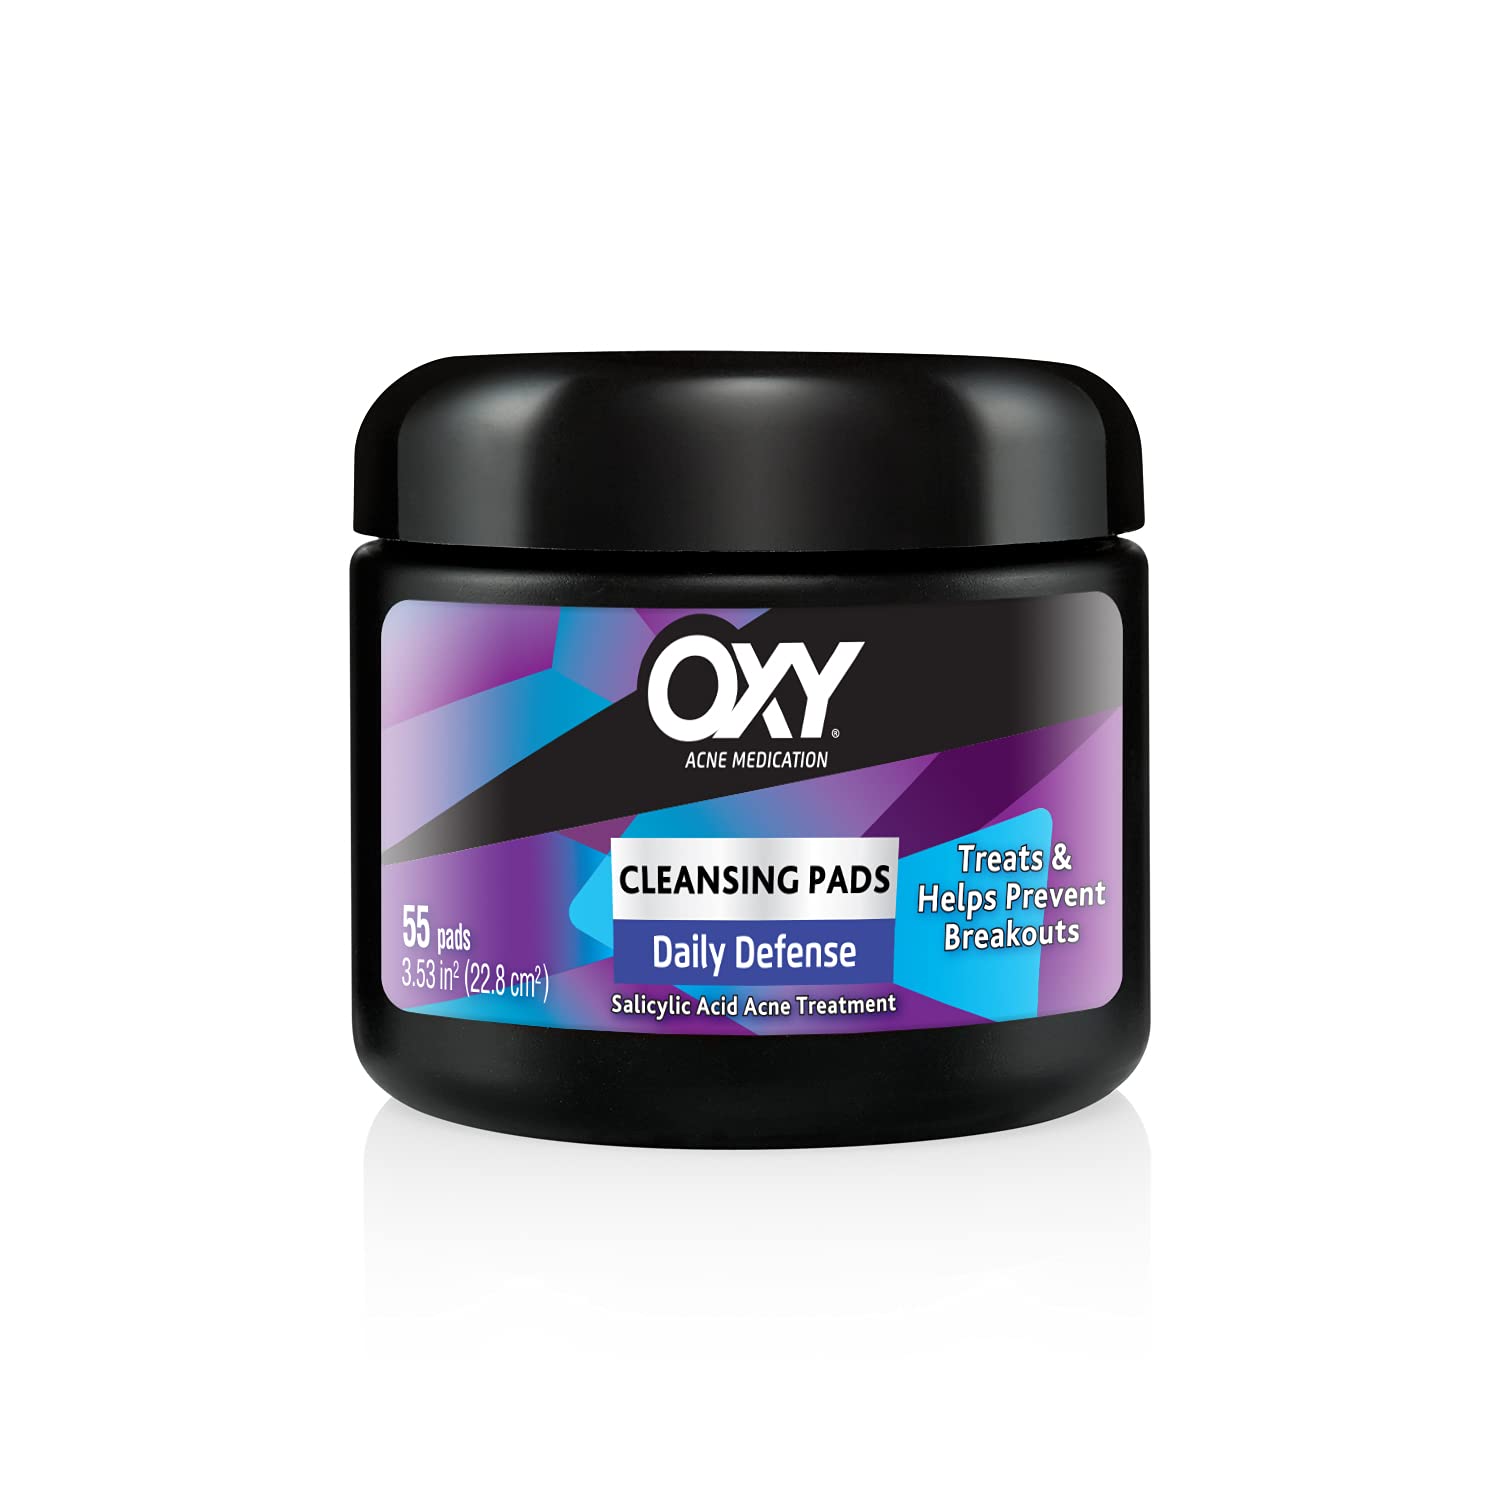 OXY Maximum Strength Deep Pore Cleansing Pads - 55 Count Jar